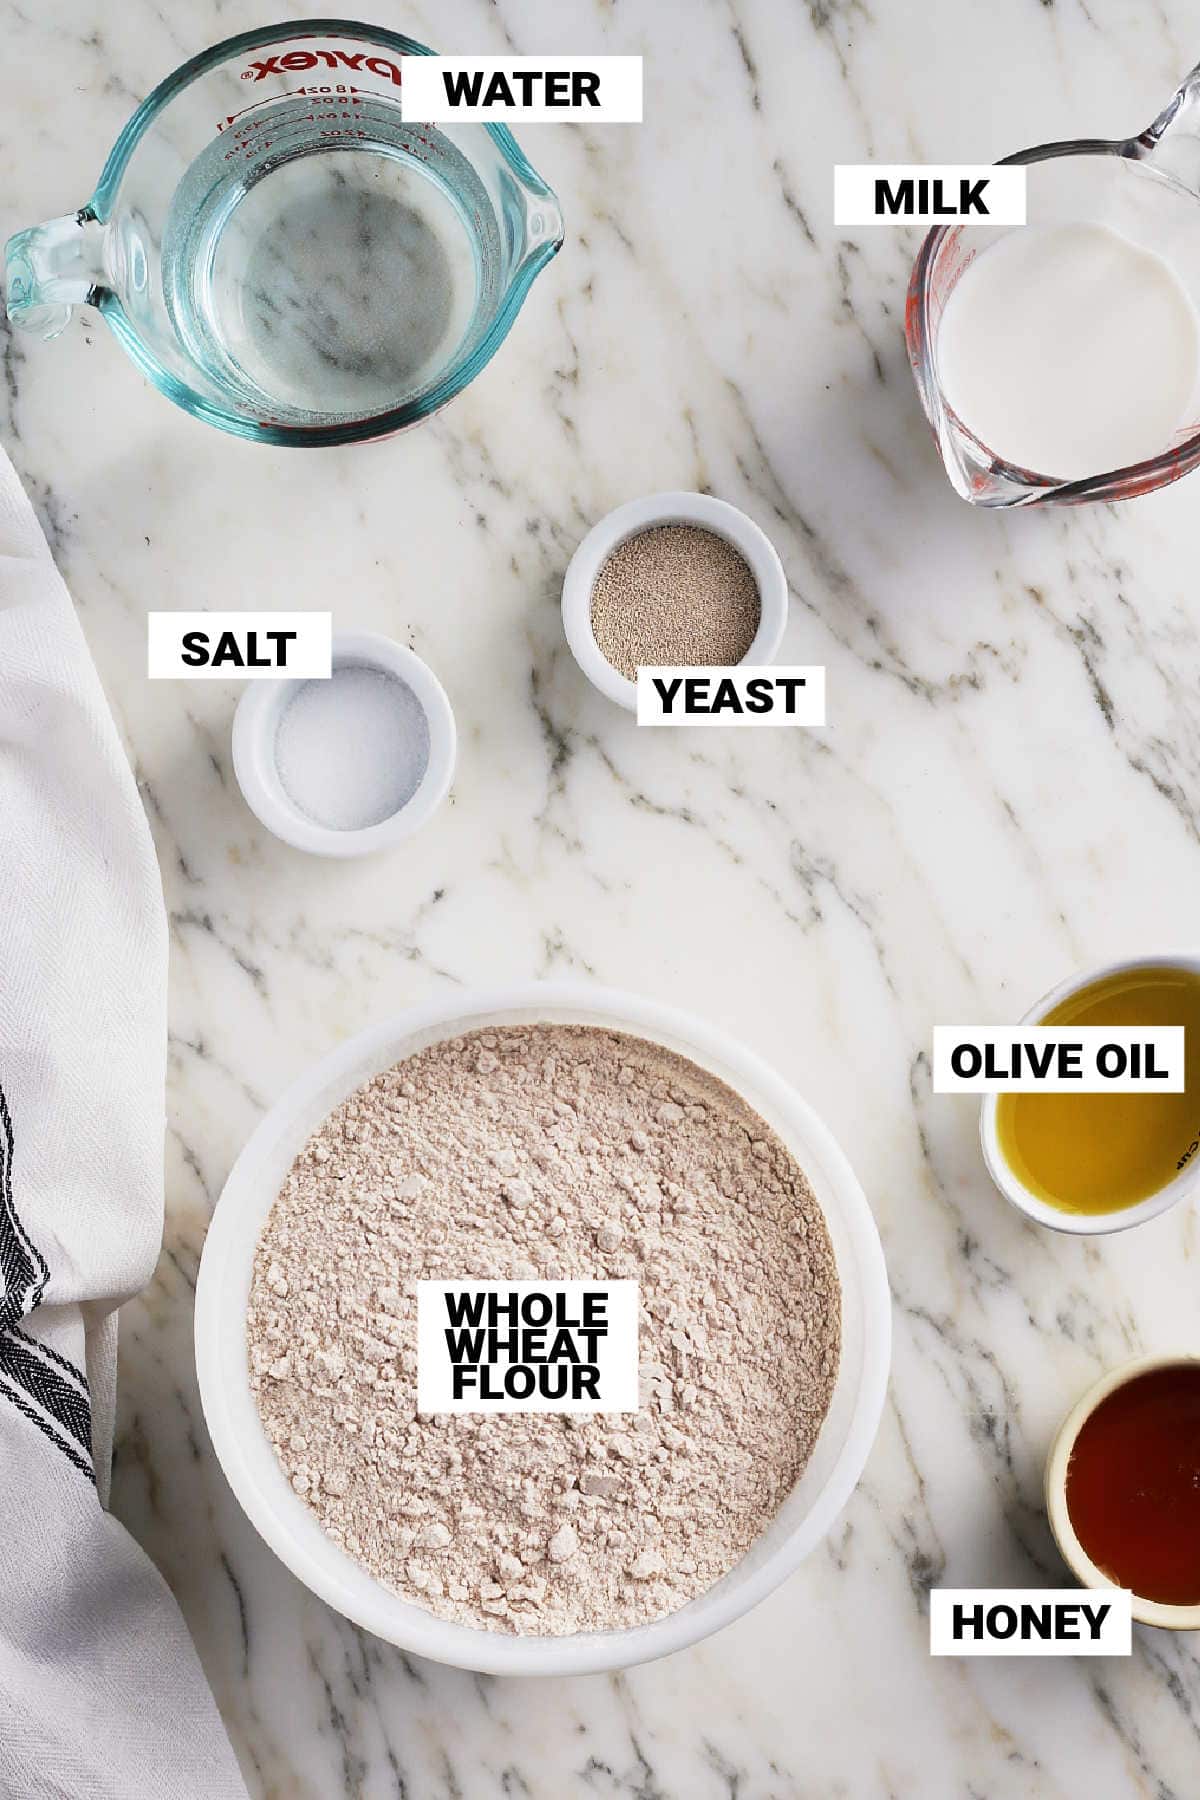 w،le wheat flour, ،ney, olive oil, salt, yeast, milk, and water mise en place to make ،ney wheat bread